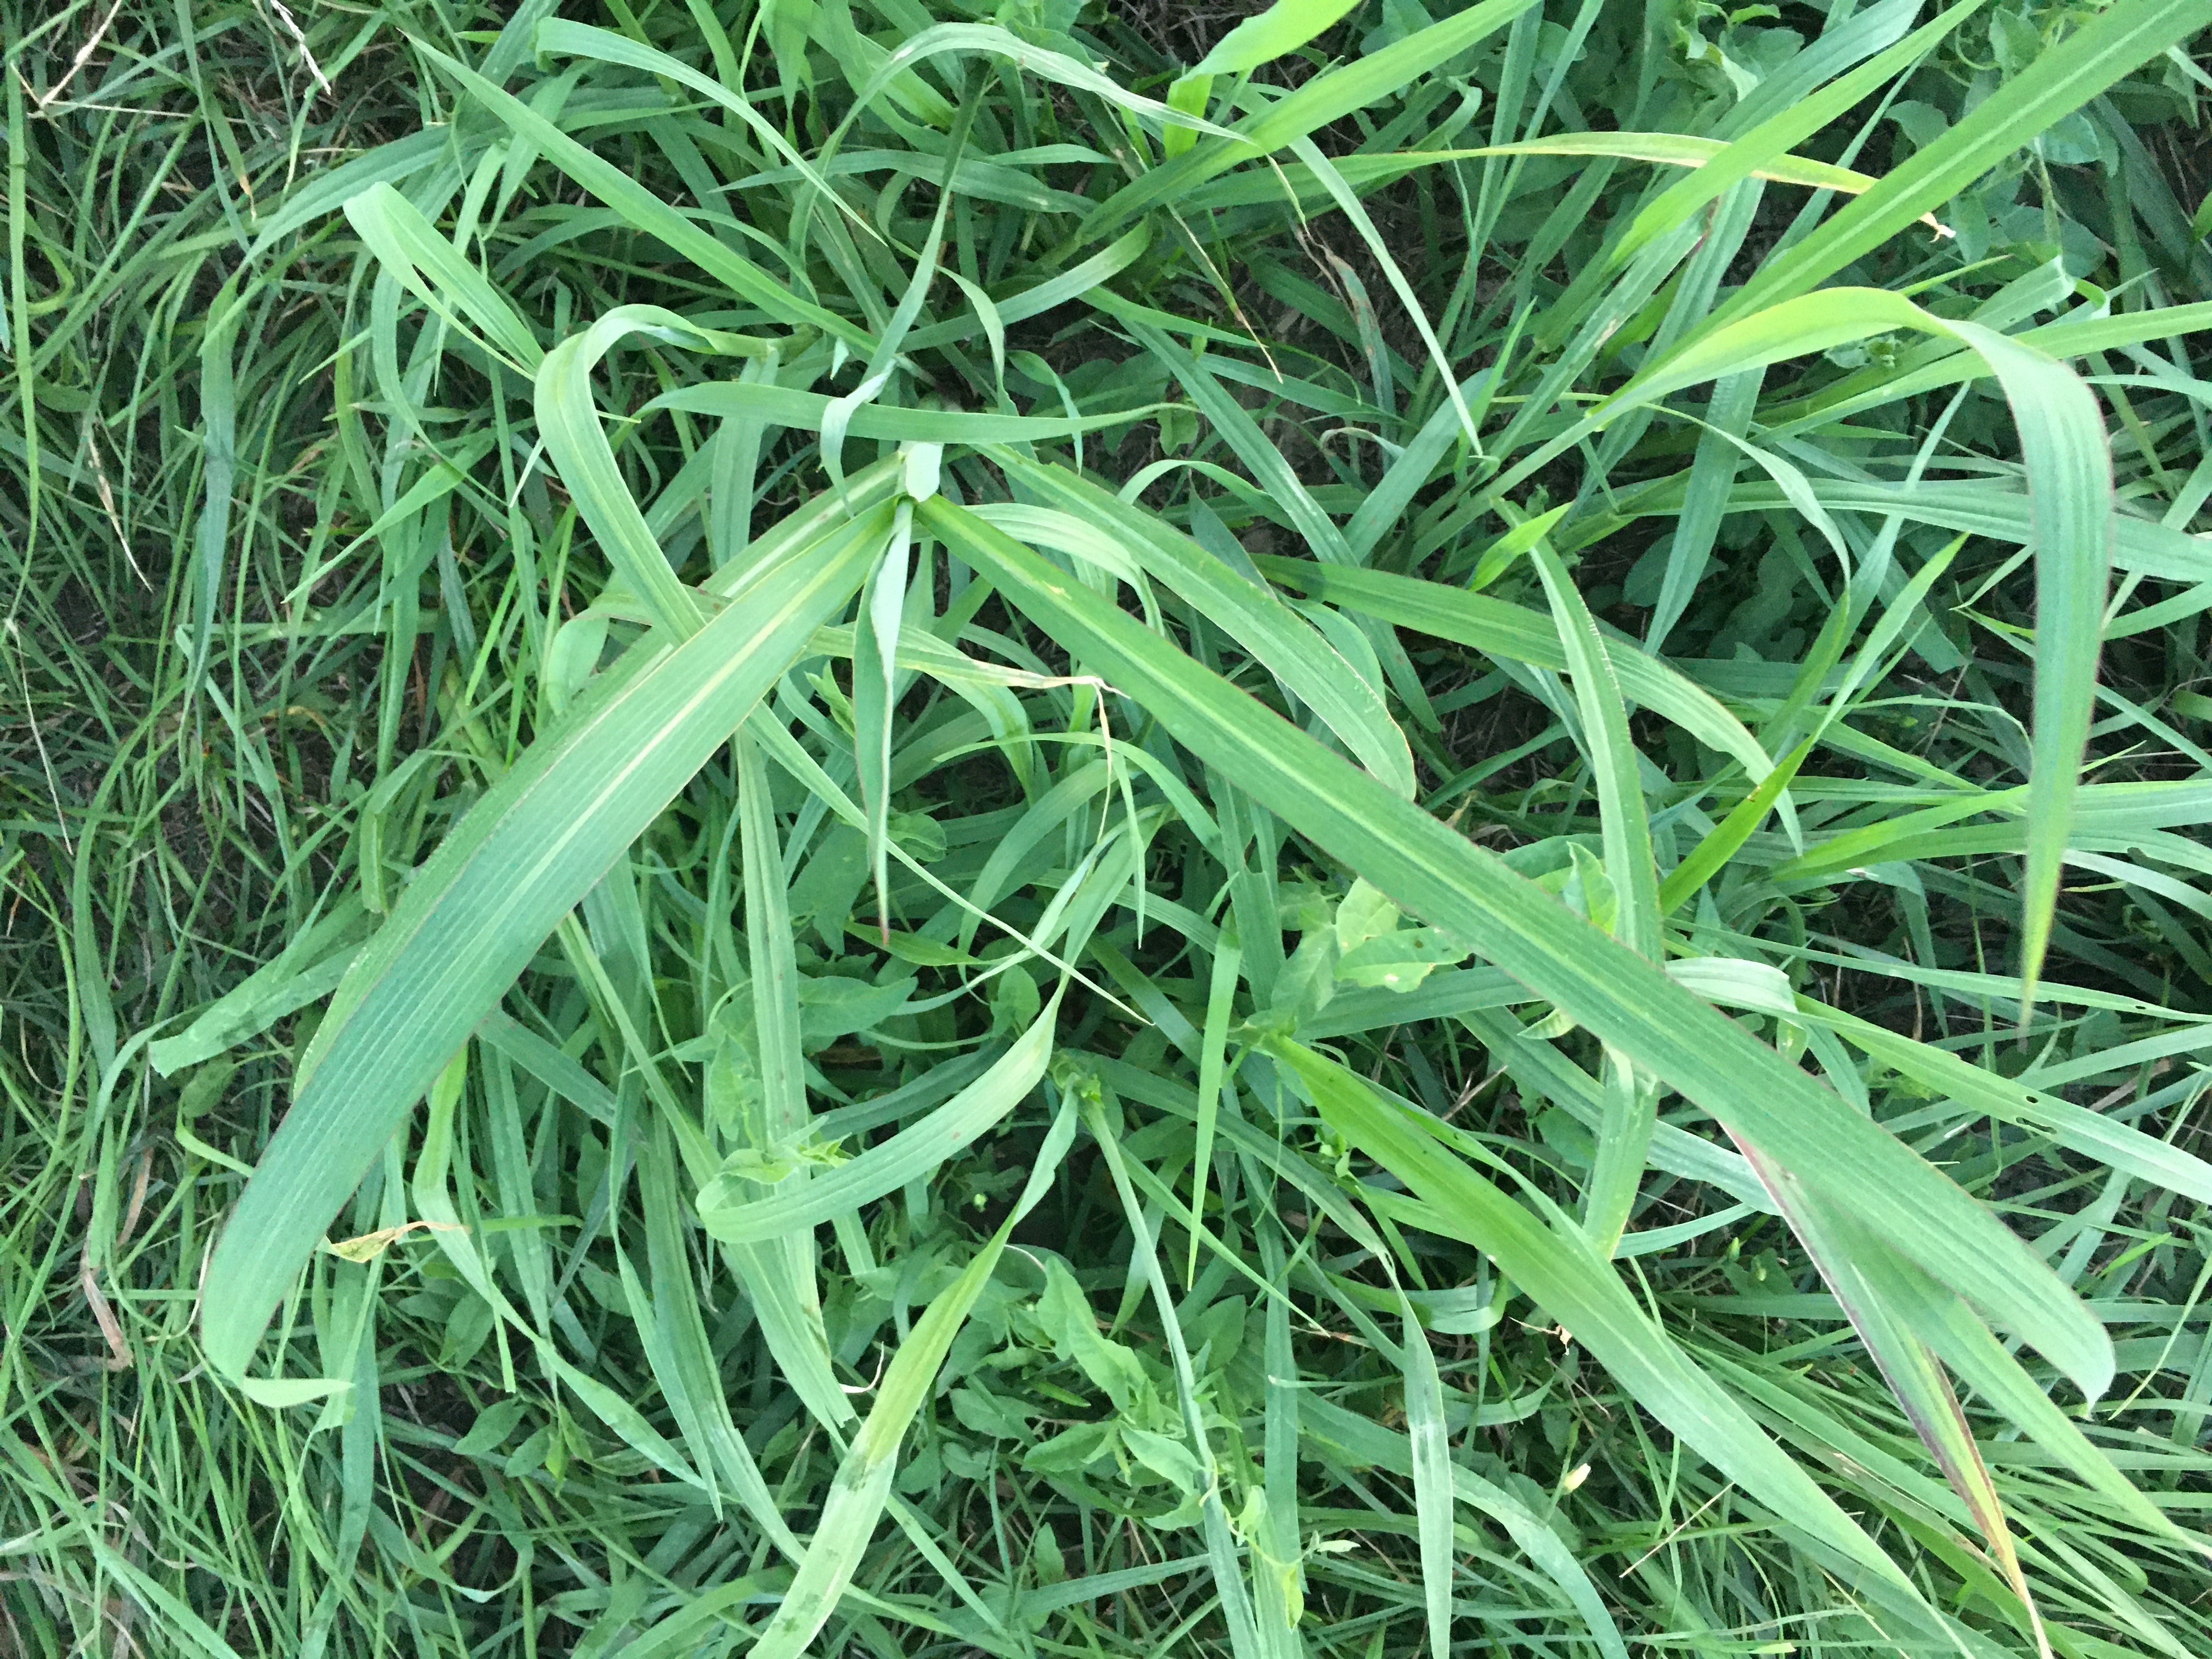 Open Johnson grass, a common forage, can build up prussic acid, which is harmful and sometimes deadly to animals. Photo courtesy of Tim Evans.